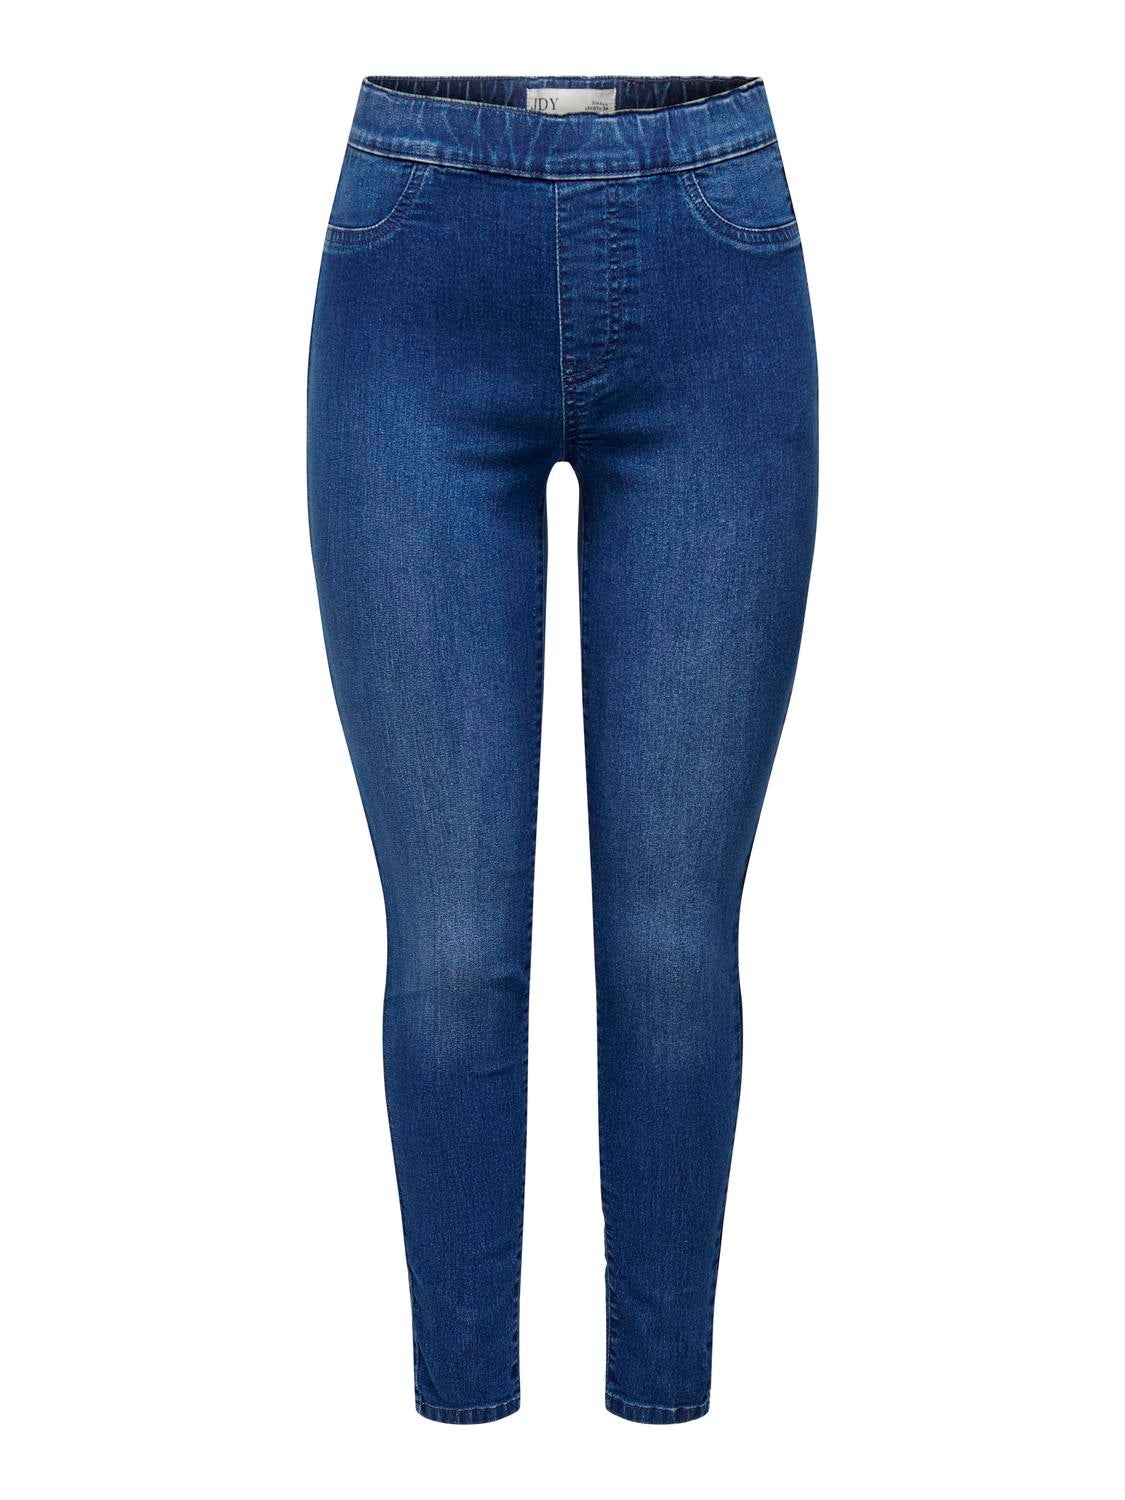 Knowza Leggings Jeans for Women Denim Pants with Pocket India | Ubuy